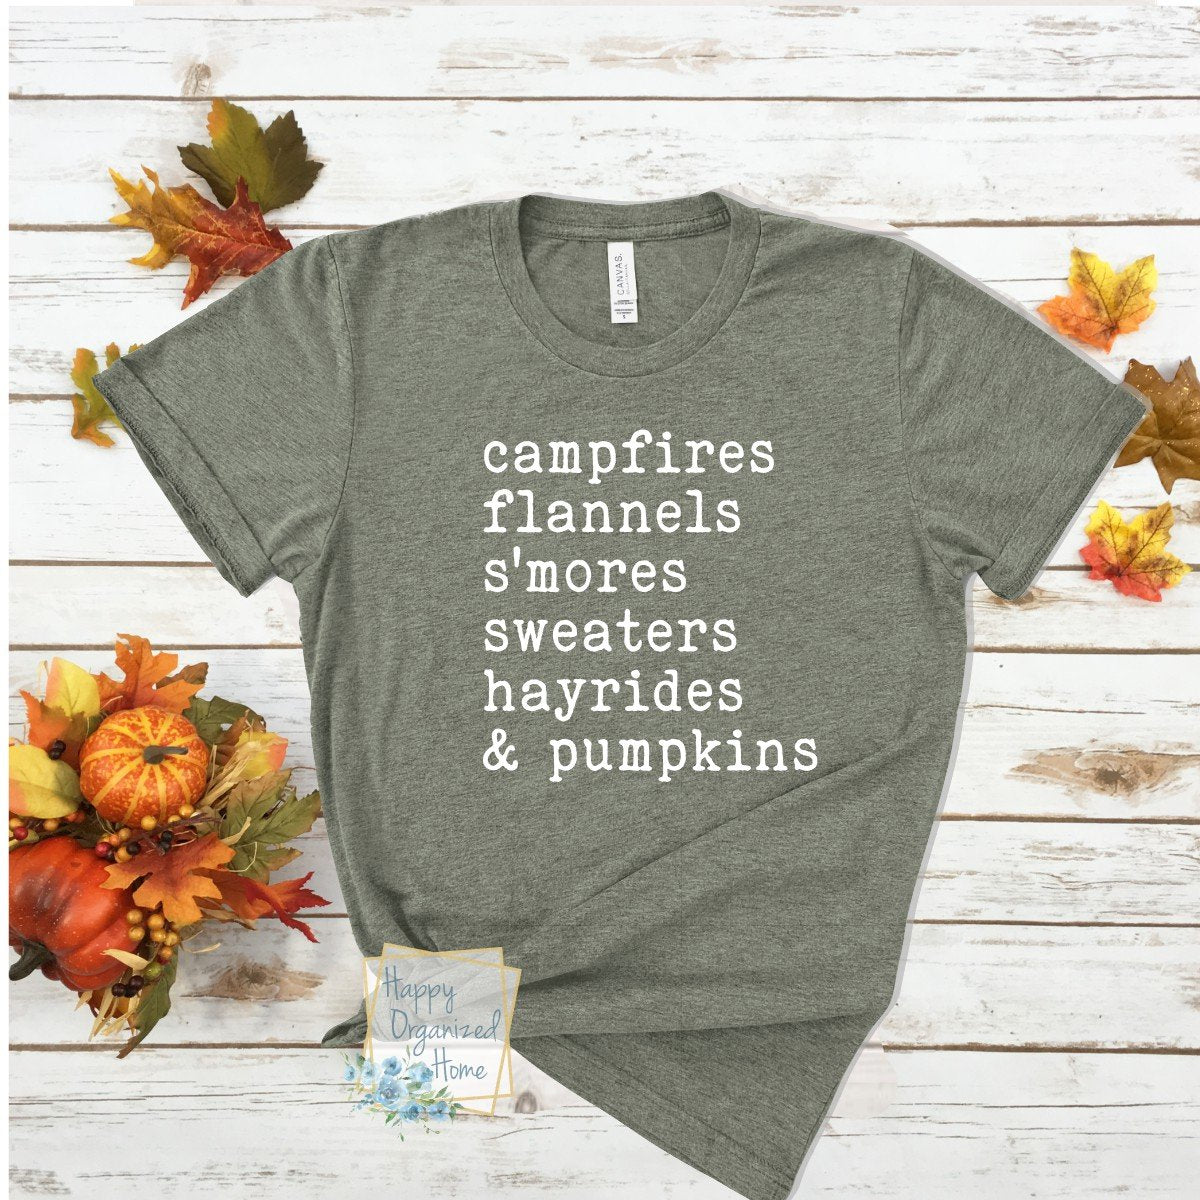 Campfires, flannels, s'mores, sweaters, hayrides & pumpkins tshirt